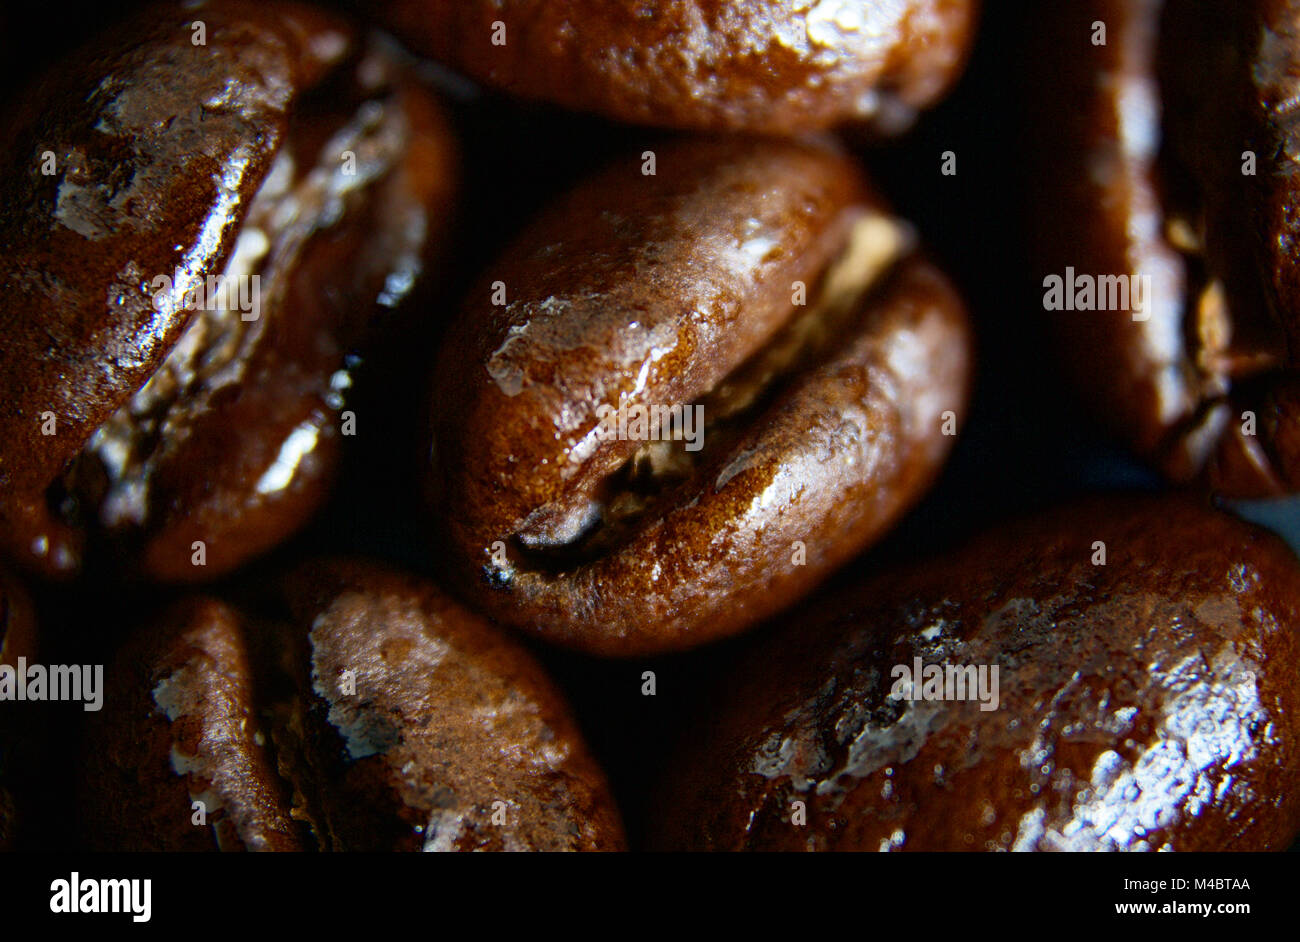 Up-close shot of dark roasted coffee beans Stock Photo